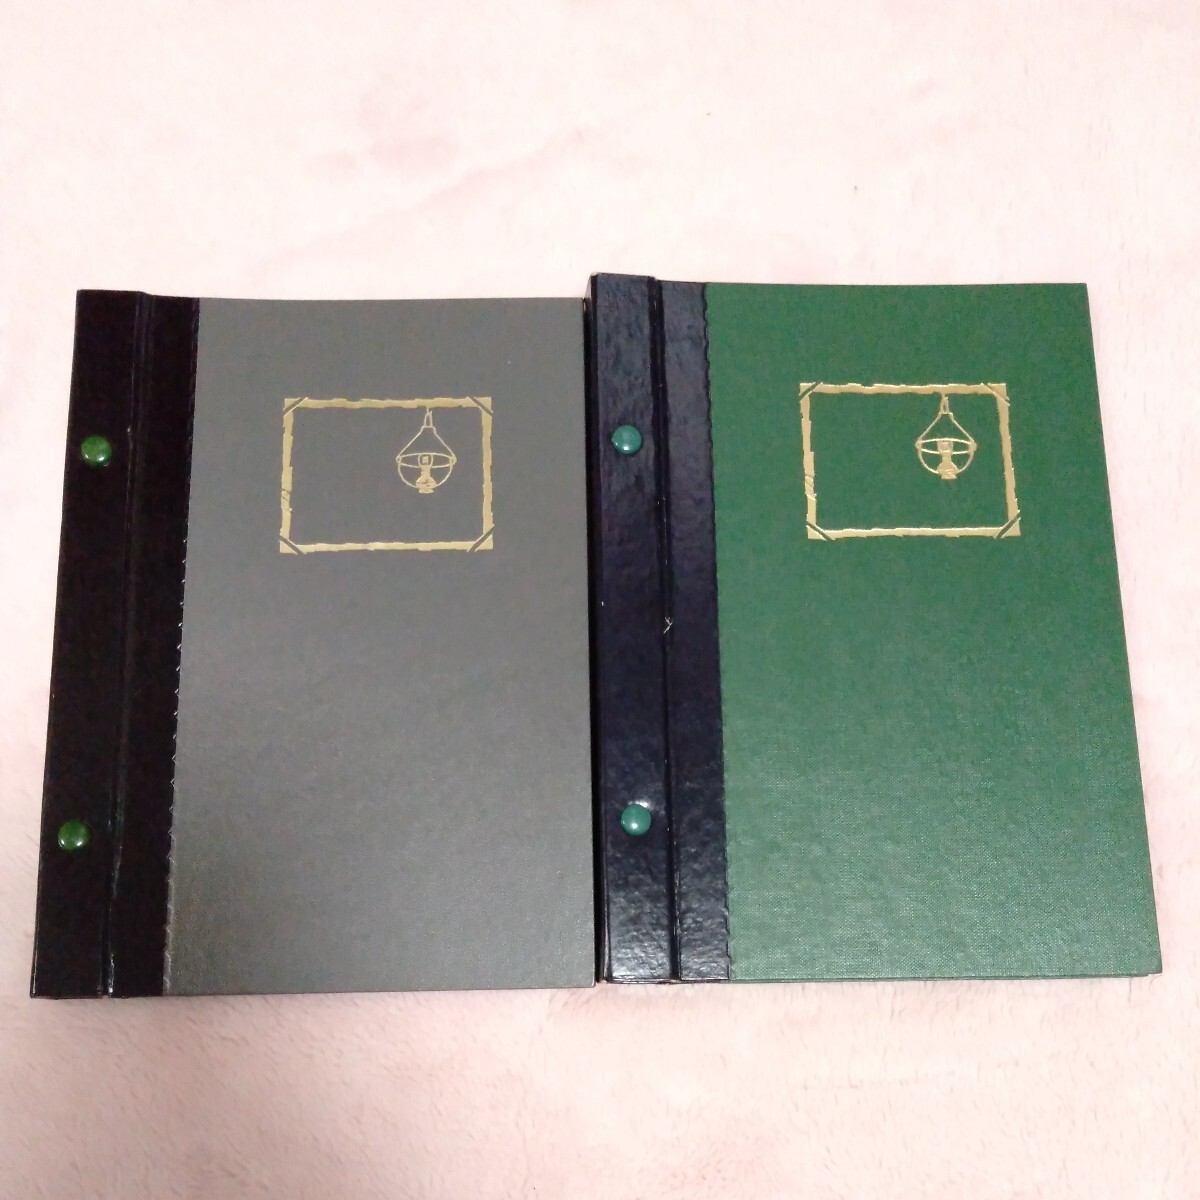  stamp stock book seat stock book stamp album lantern design green color, grey glasin paper 2 pcs. stamp. attached is is not 